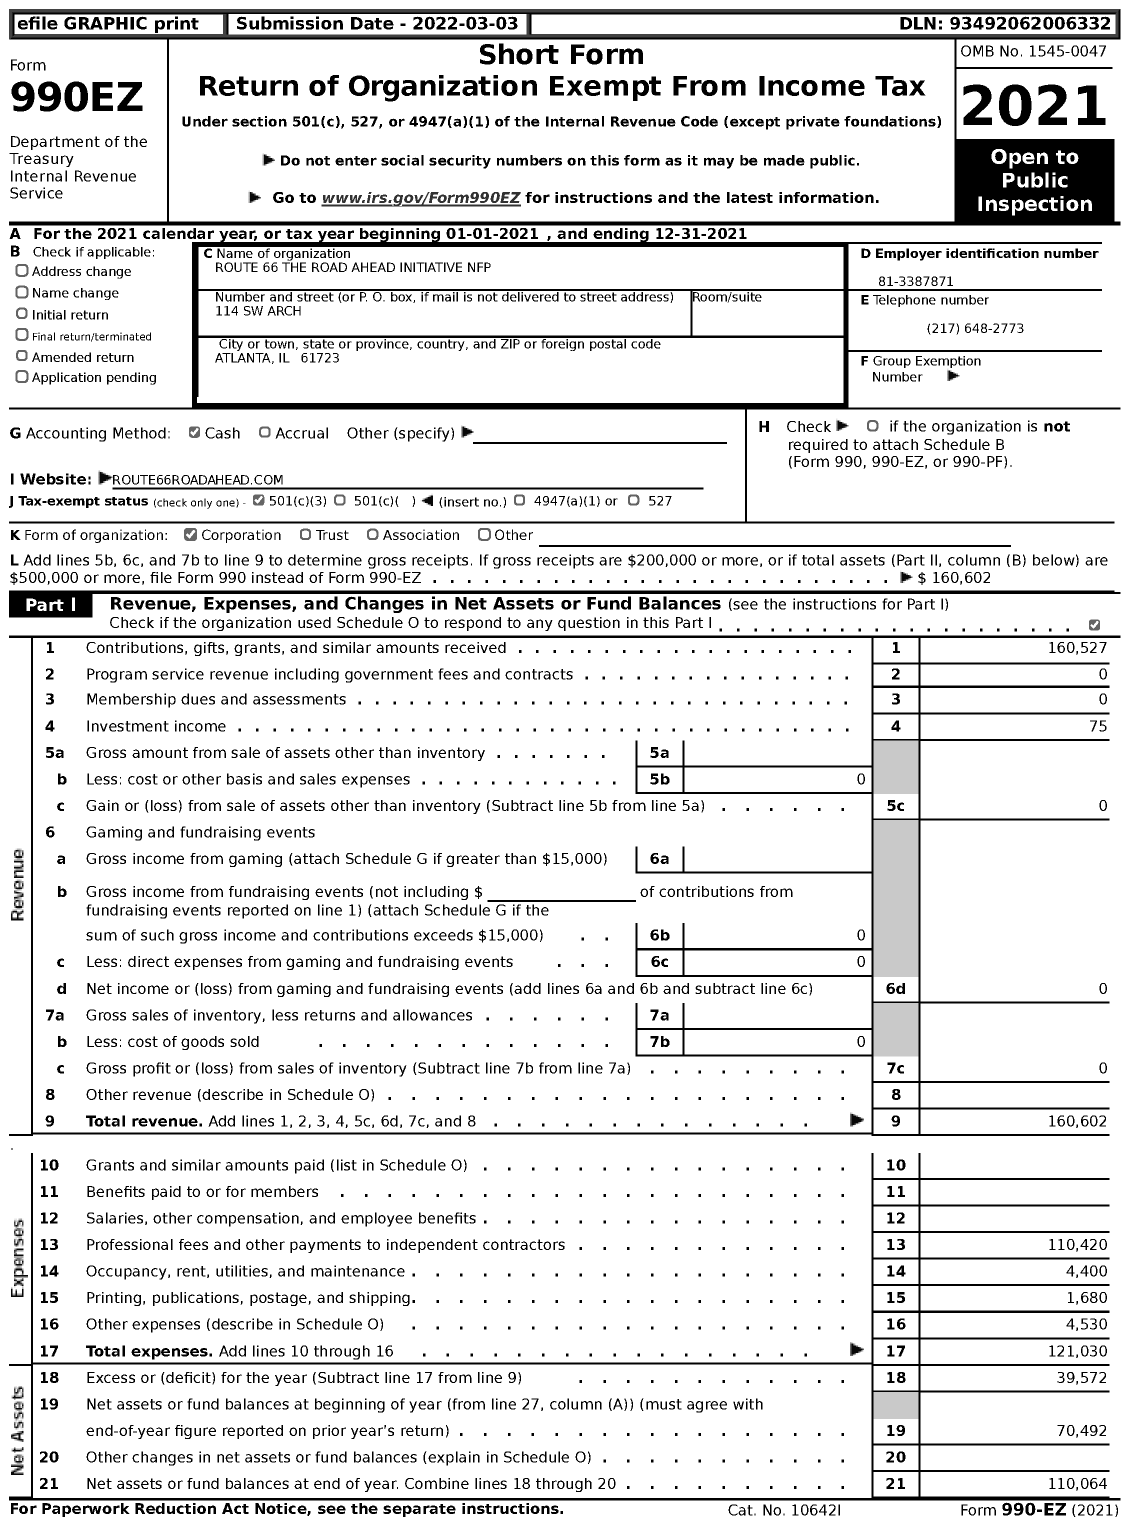 Image of first page of 2021 Form 990EZ for Route 66 the Road Ahead Initiative NFP